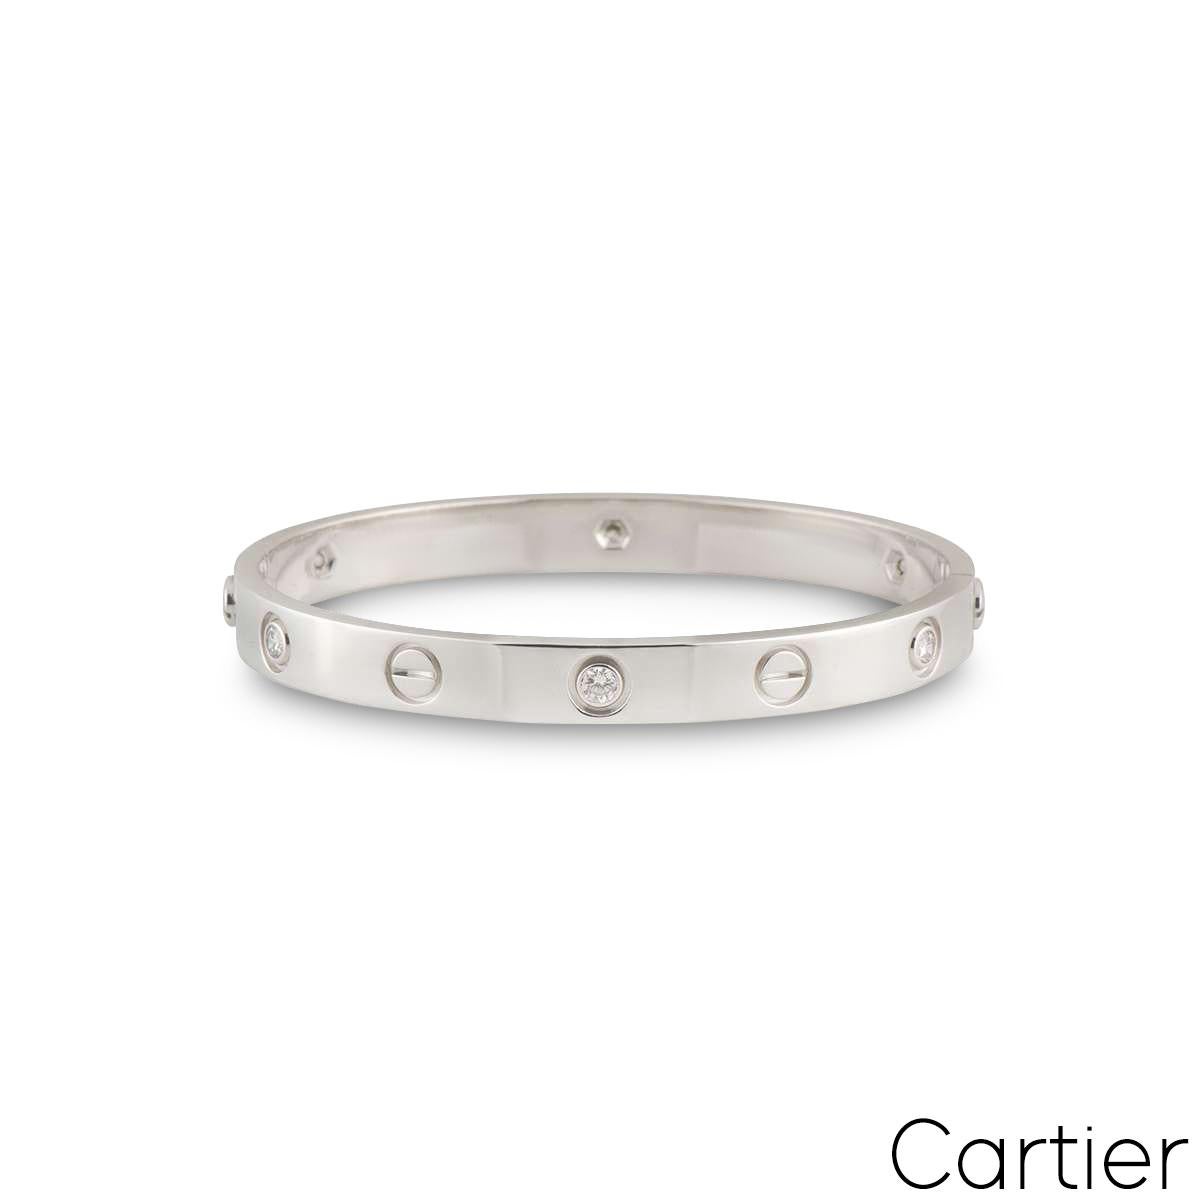 An iconic 18k white gold Cartier diamond bracelet from the Love collection. The bracelet comprises of the iconic screw motifs alternating with round brilliant cut diamonds. There are 6 round brilliant cut diamond in a rubover setting with an